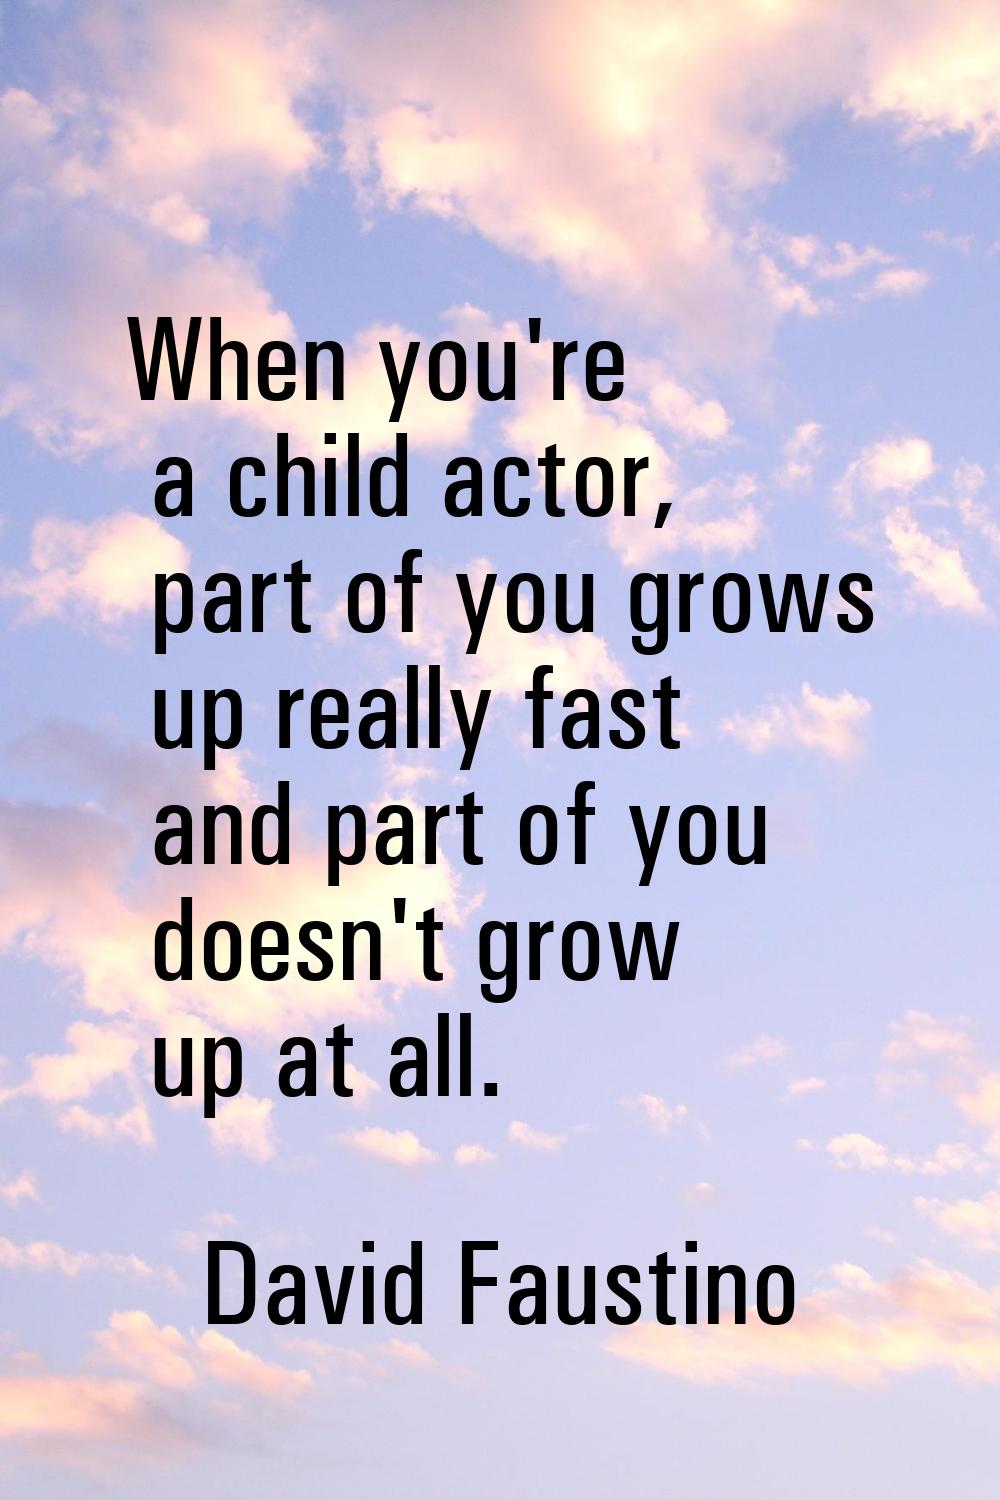 When you're a child actor, part of you grows up really fast and part of you doesn't grow up at all.